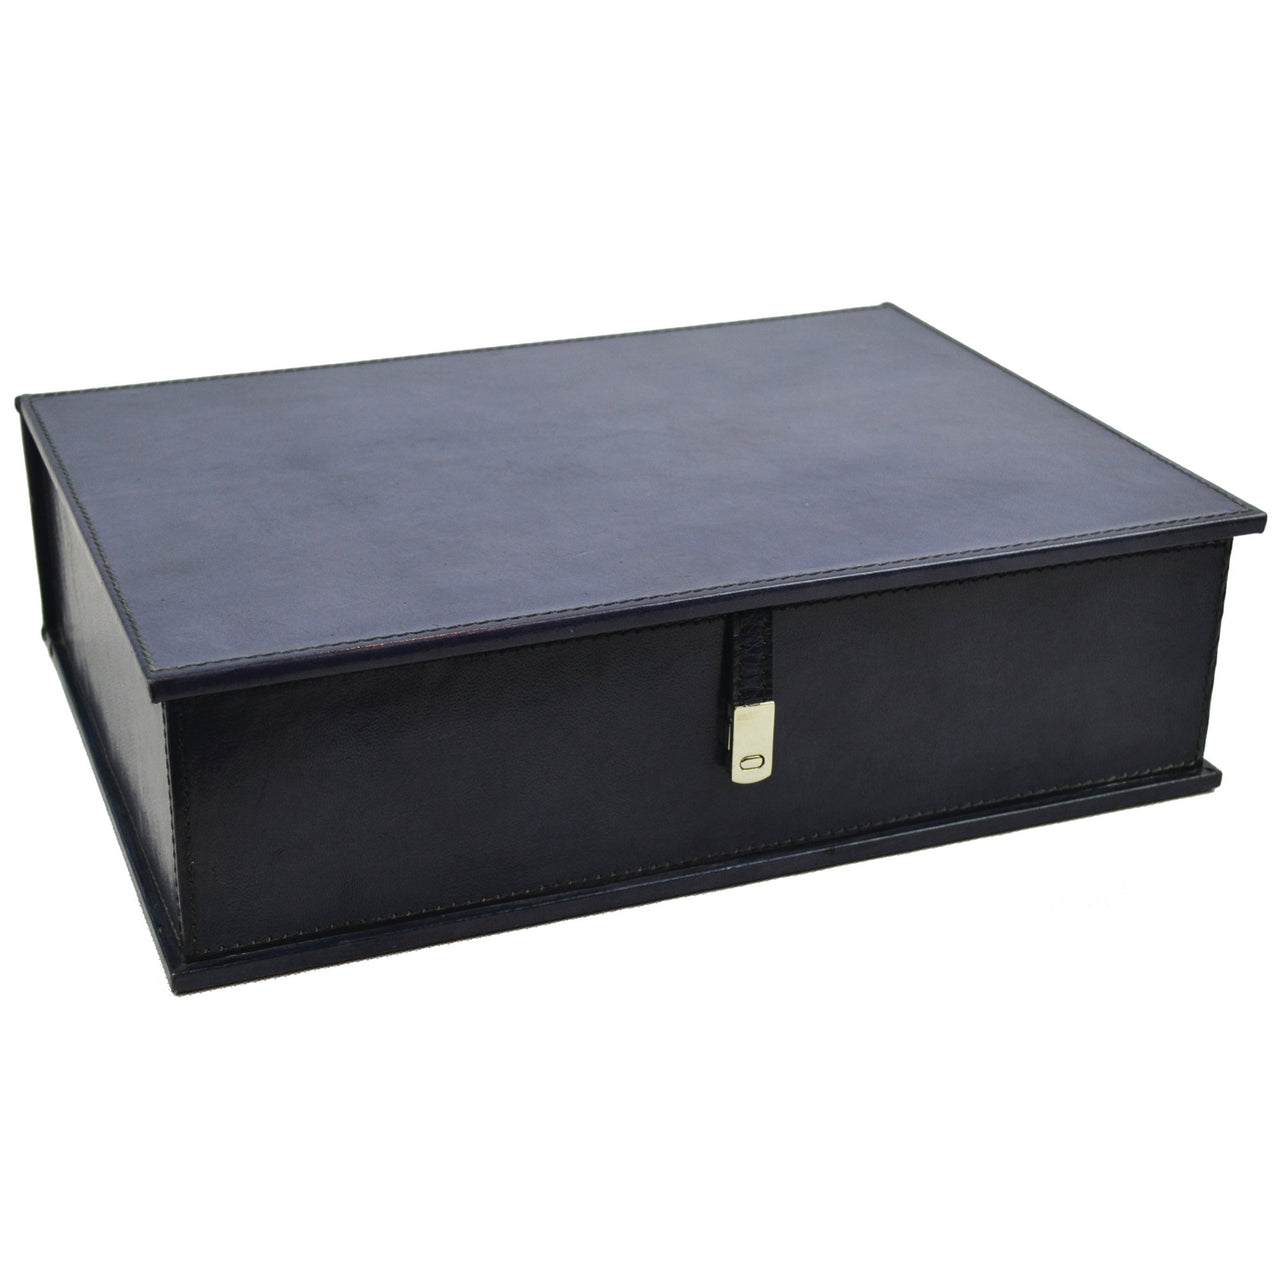 Blue Pancho Leather Document Box